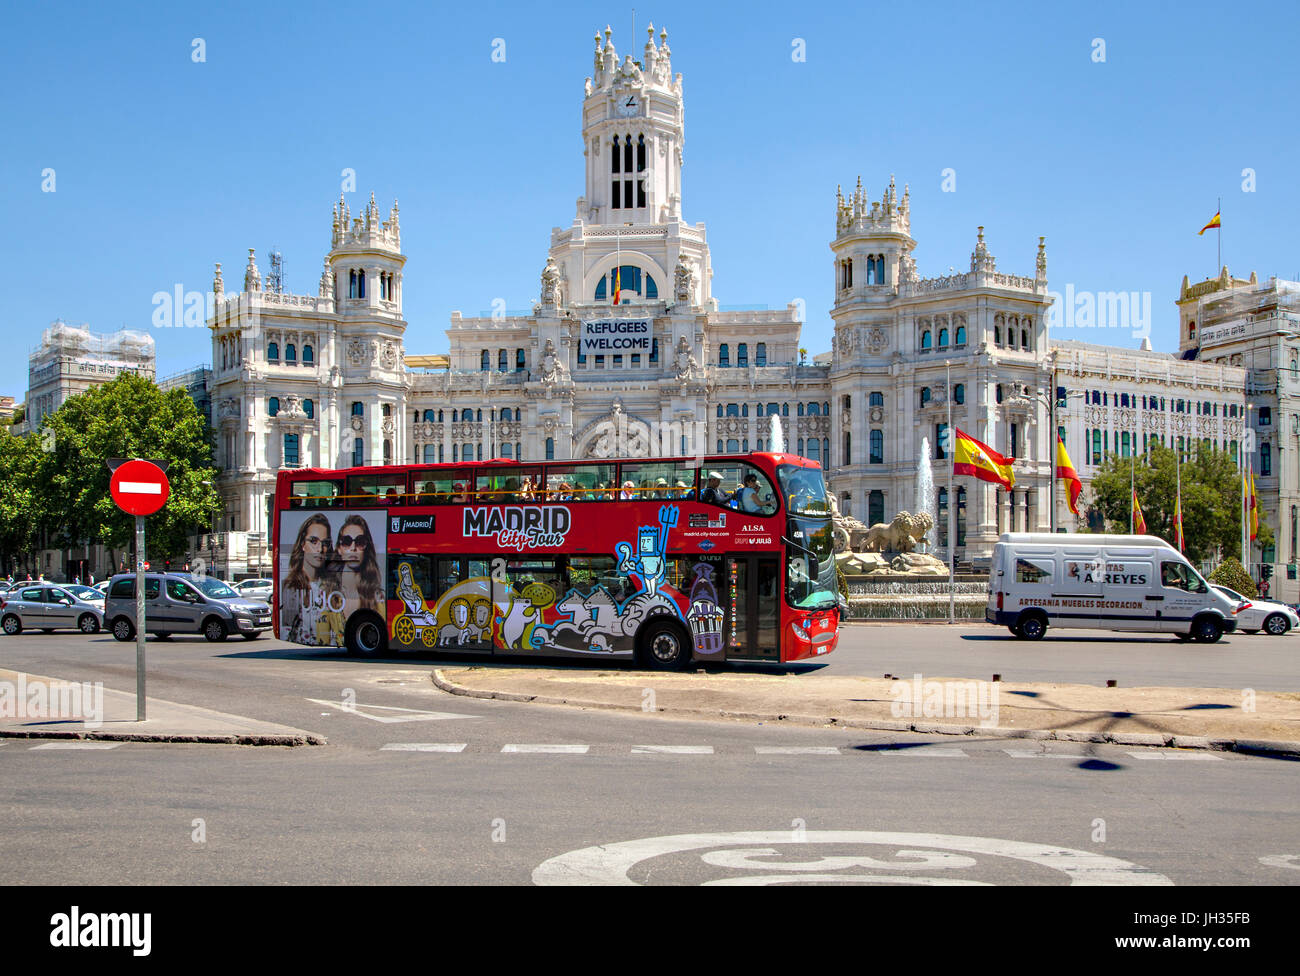 Madrid sightseeing bus driving around the Plaza de Cibeles and ...